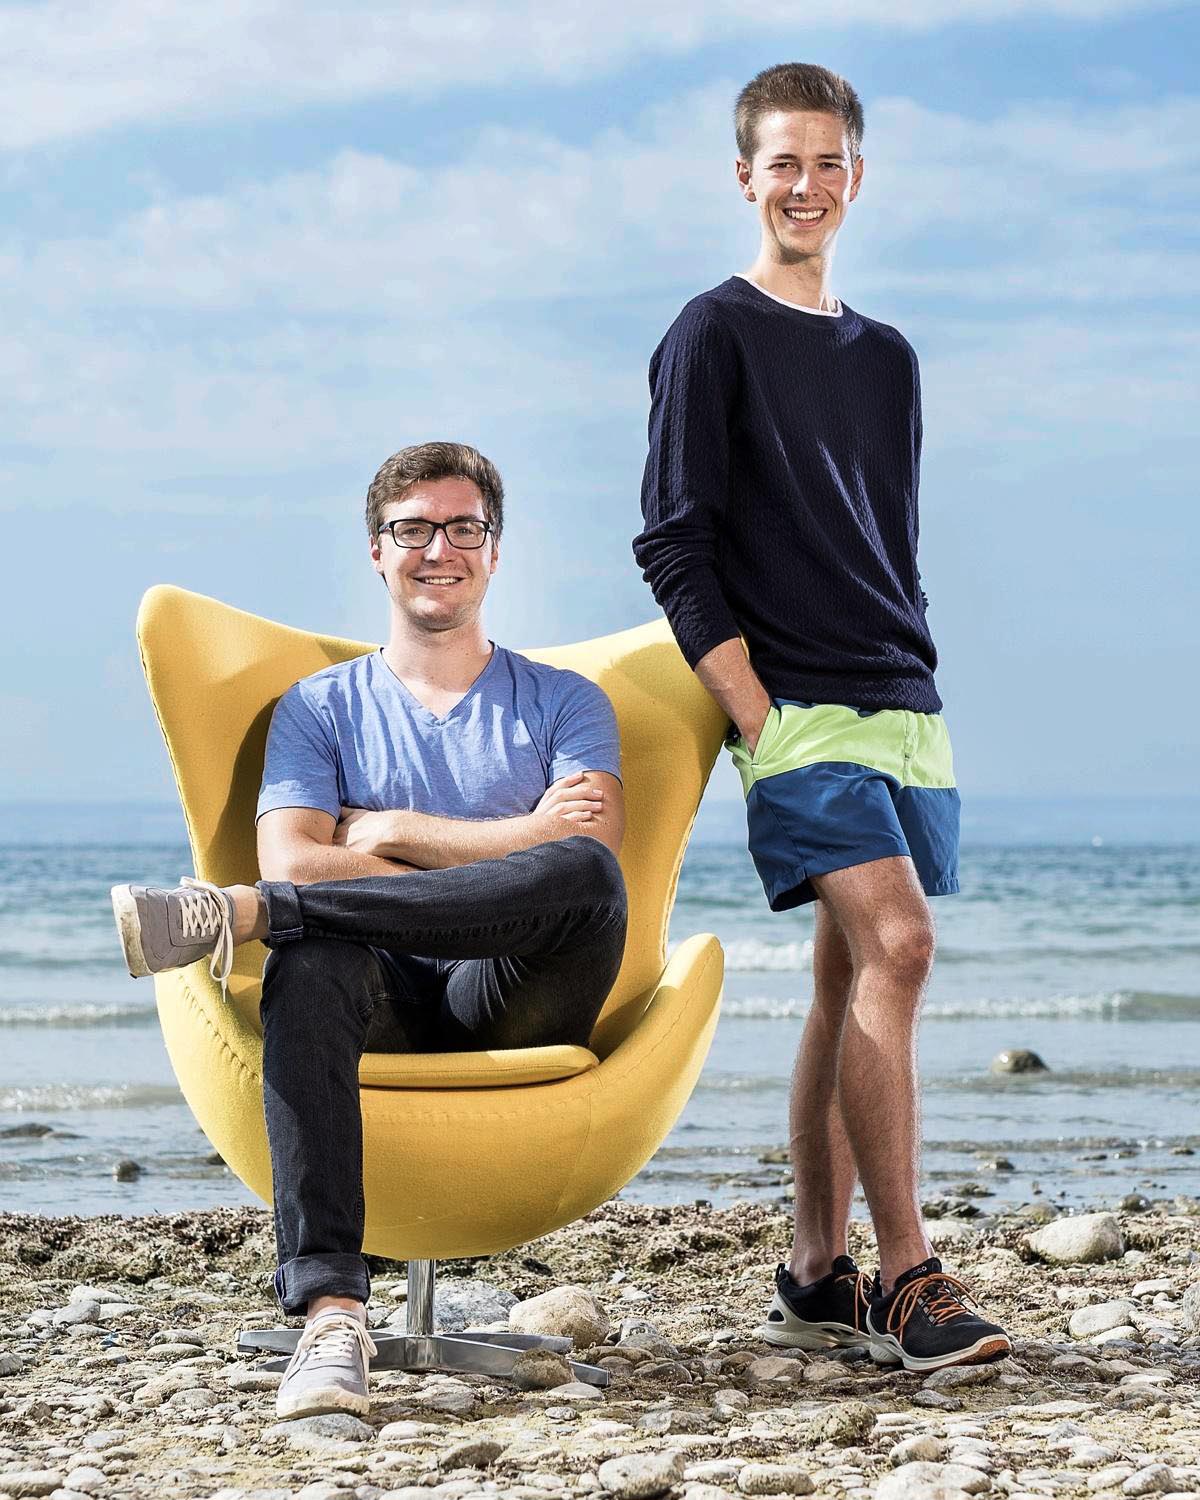 David Nelles and Christian Serrer on the shore of a beach